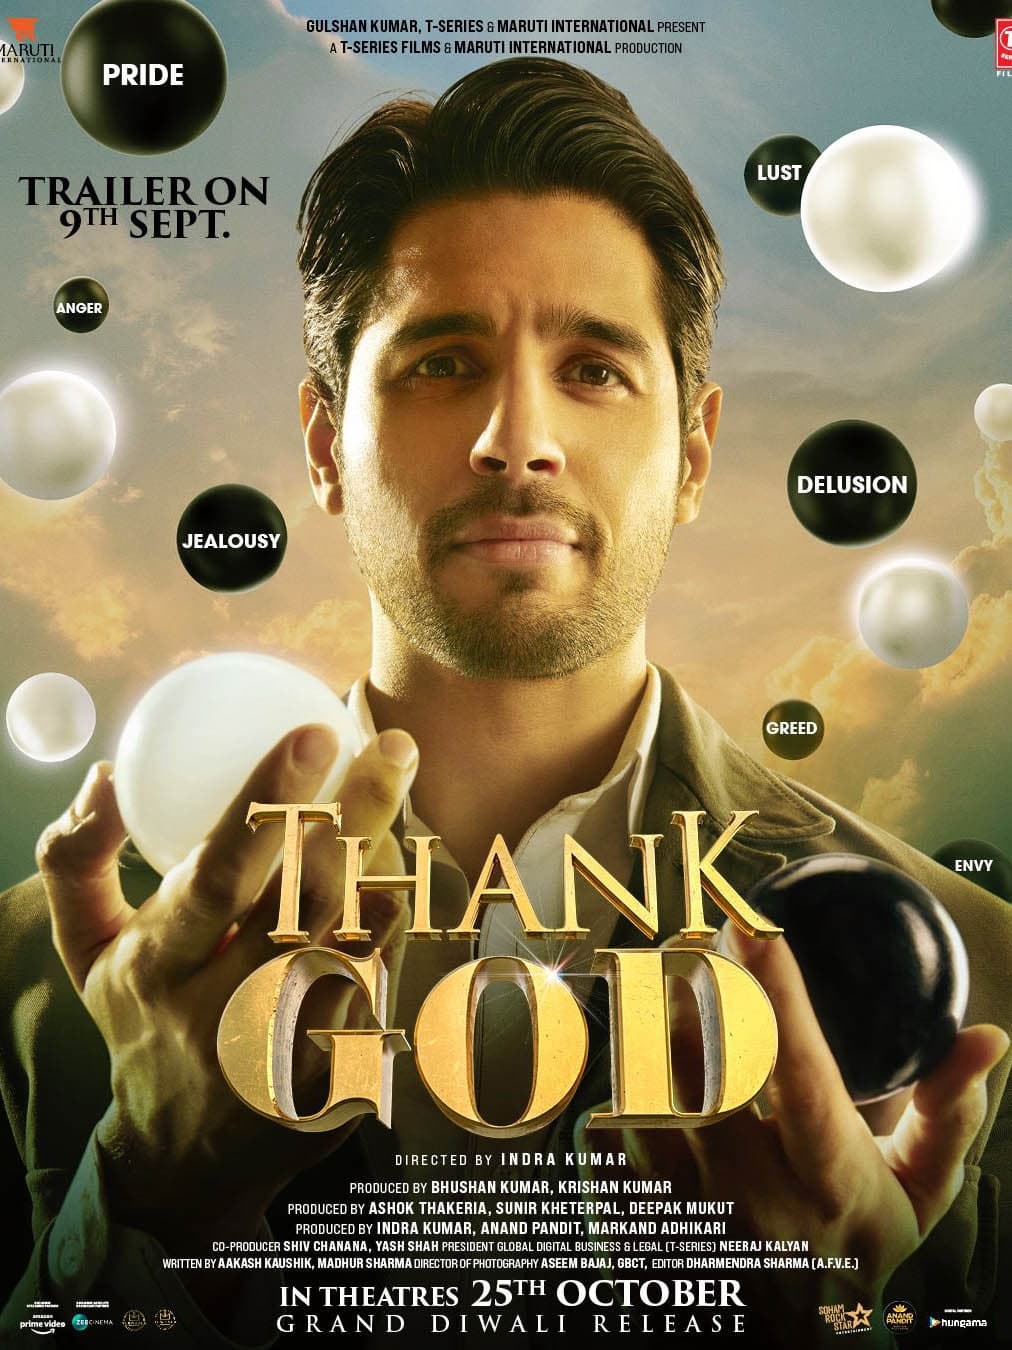 Poster for the movie "Thank God"